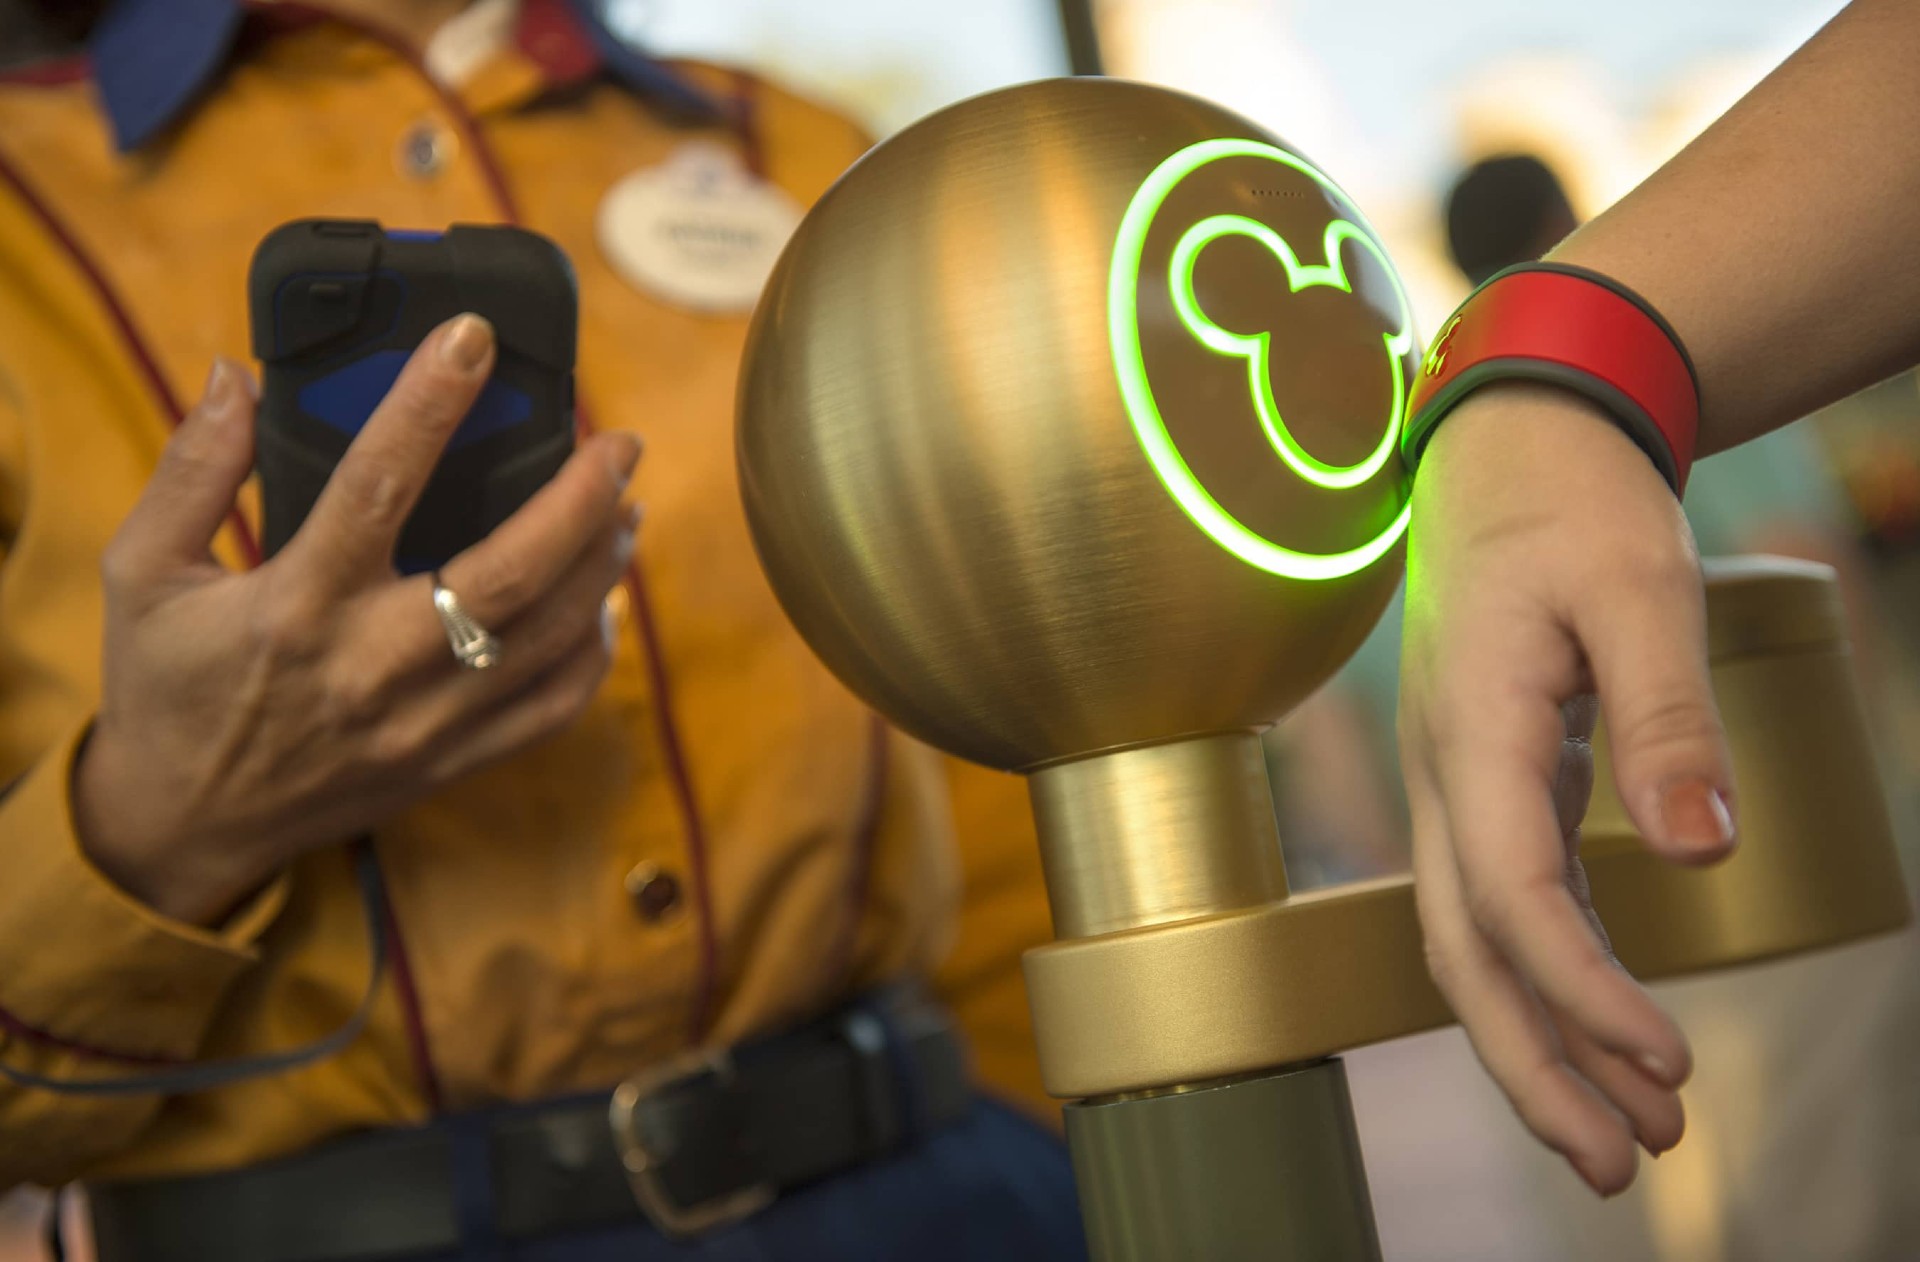 Magicband Touch Points at Walt Disney World